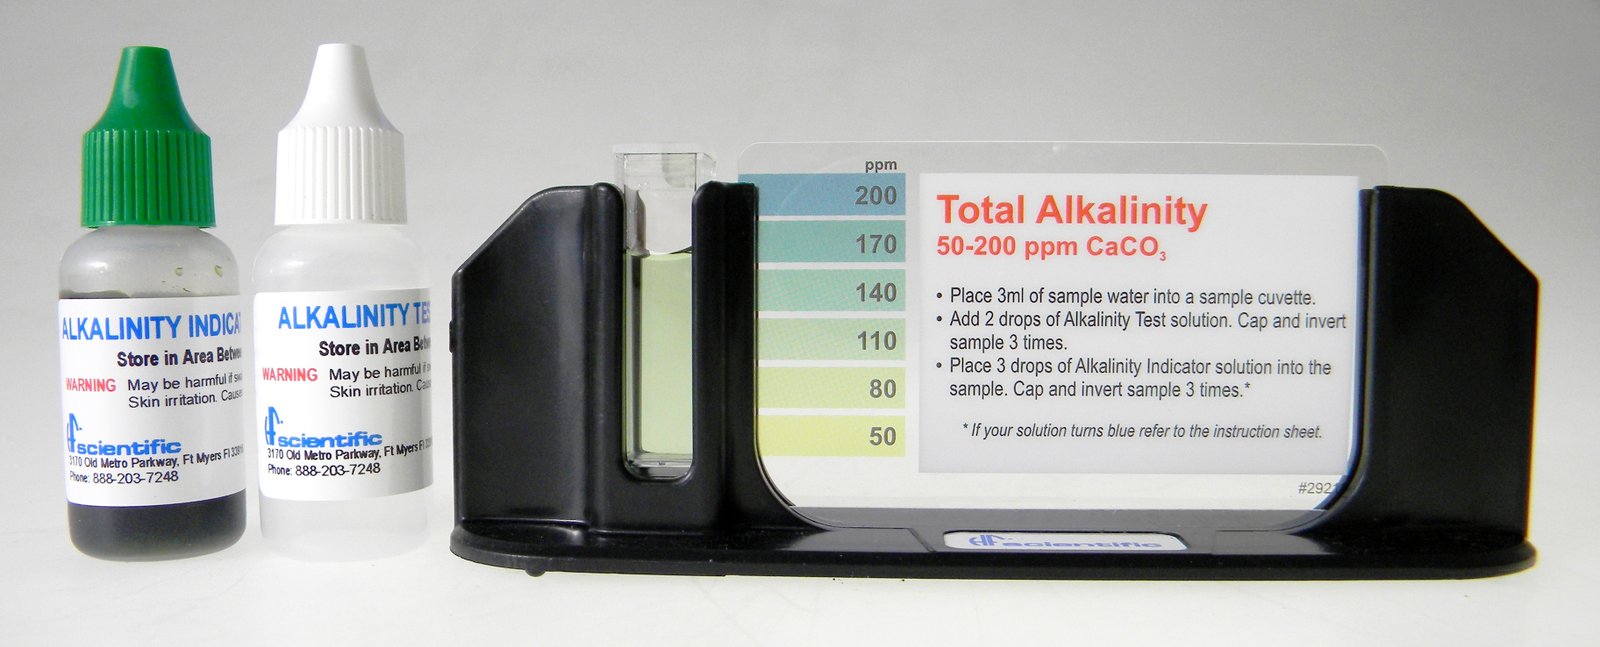 Total Alkalinity visual kit with Reagents